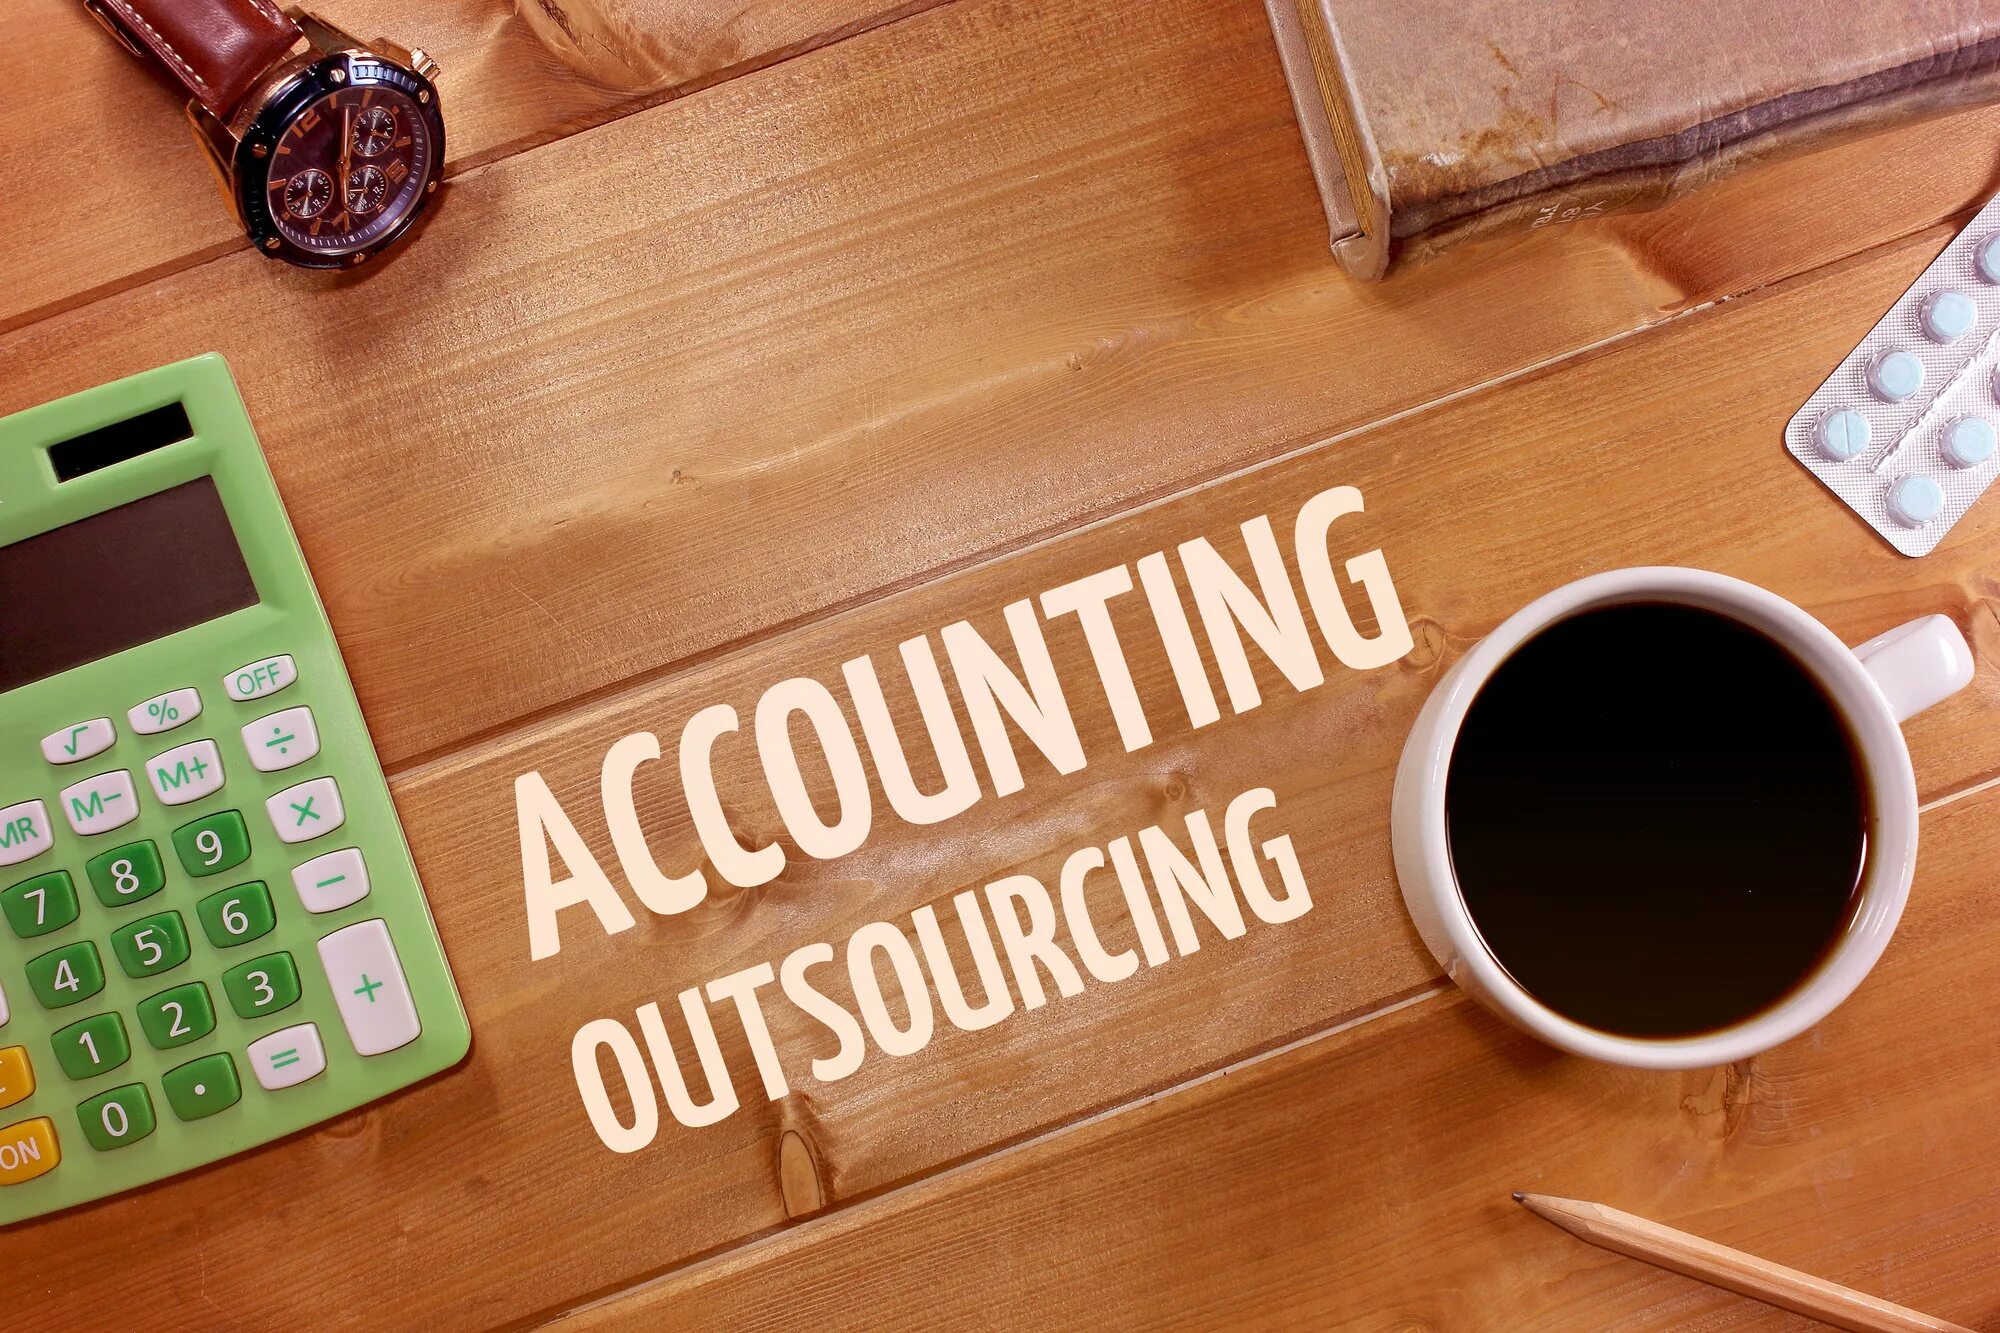 Accepted accounting. Бизнес калькулятор. Outsourcing Accounting. Бухгалтерия креатив. Accounting outsource.